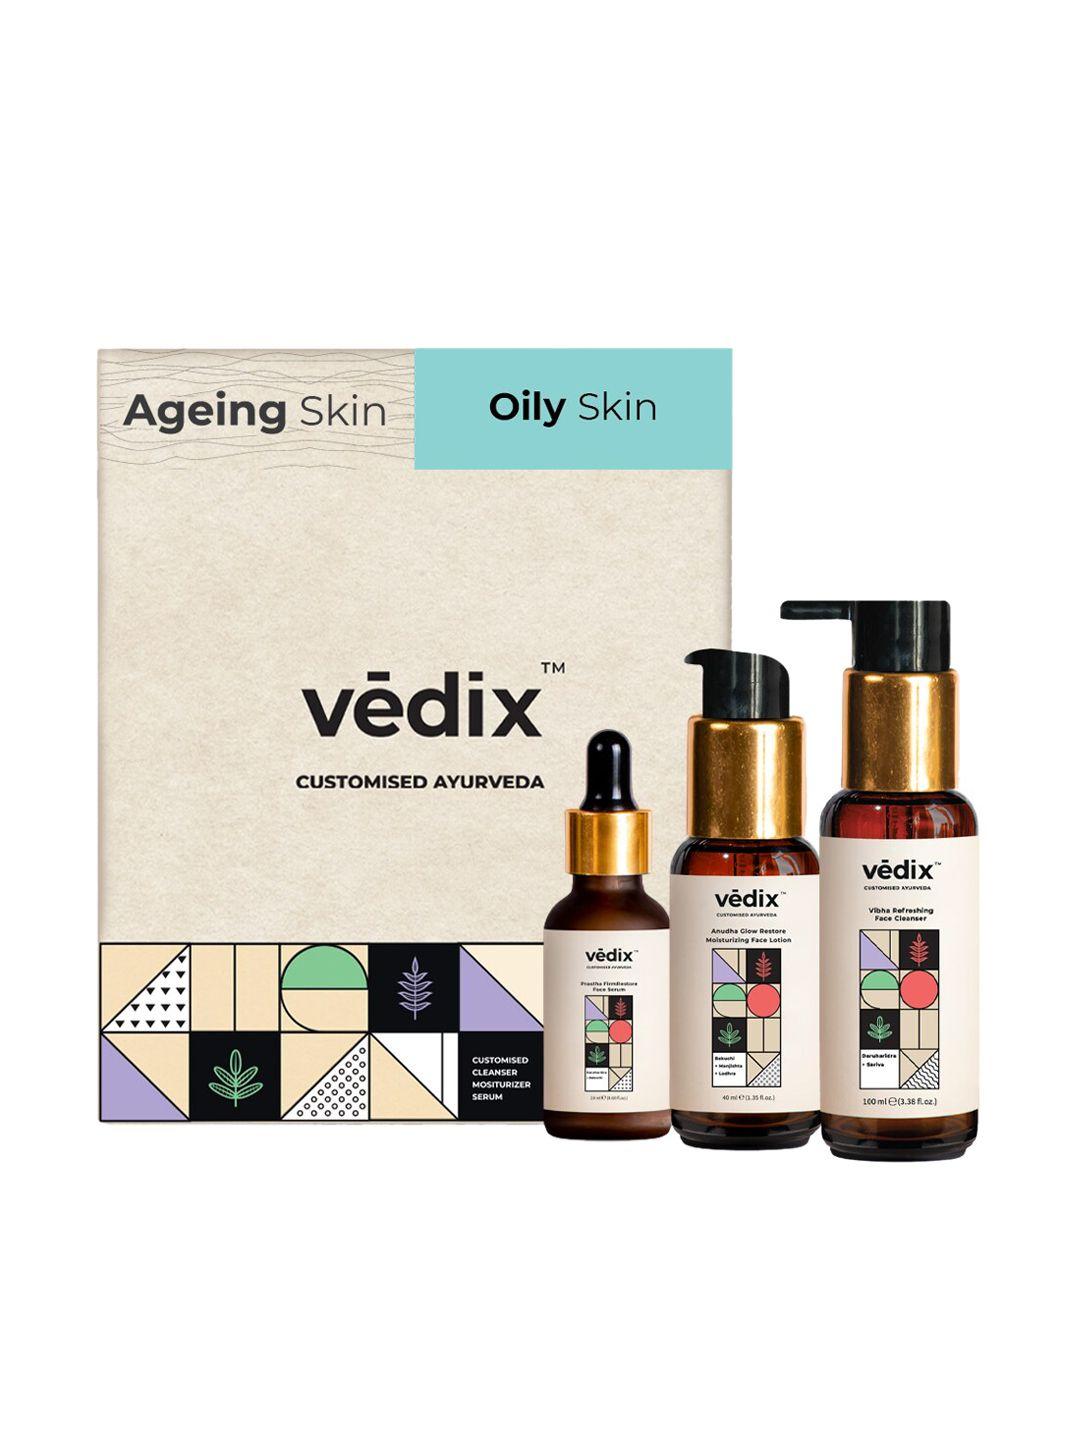 vedix customized skin care kit for visible signs for ageing for oily skin